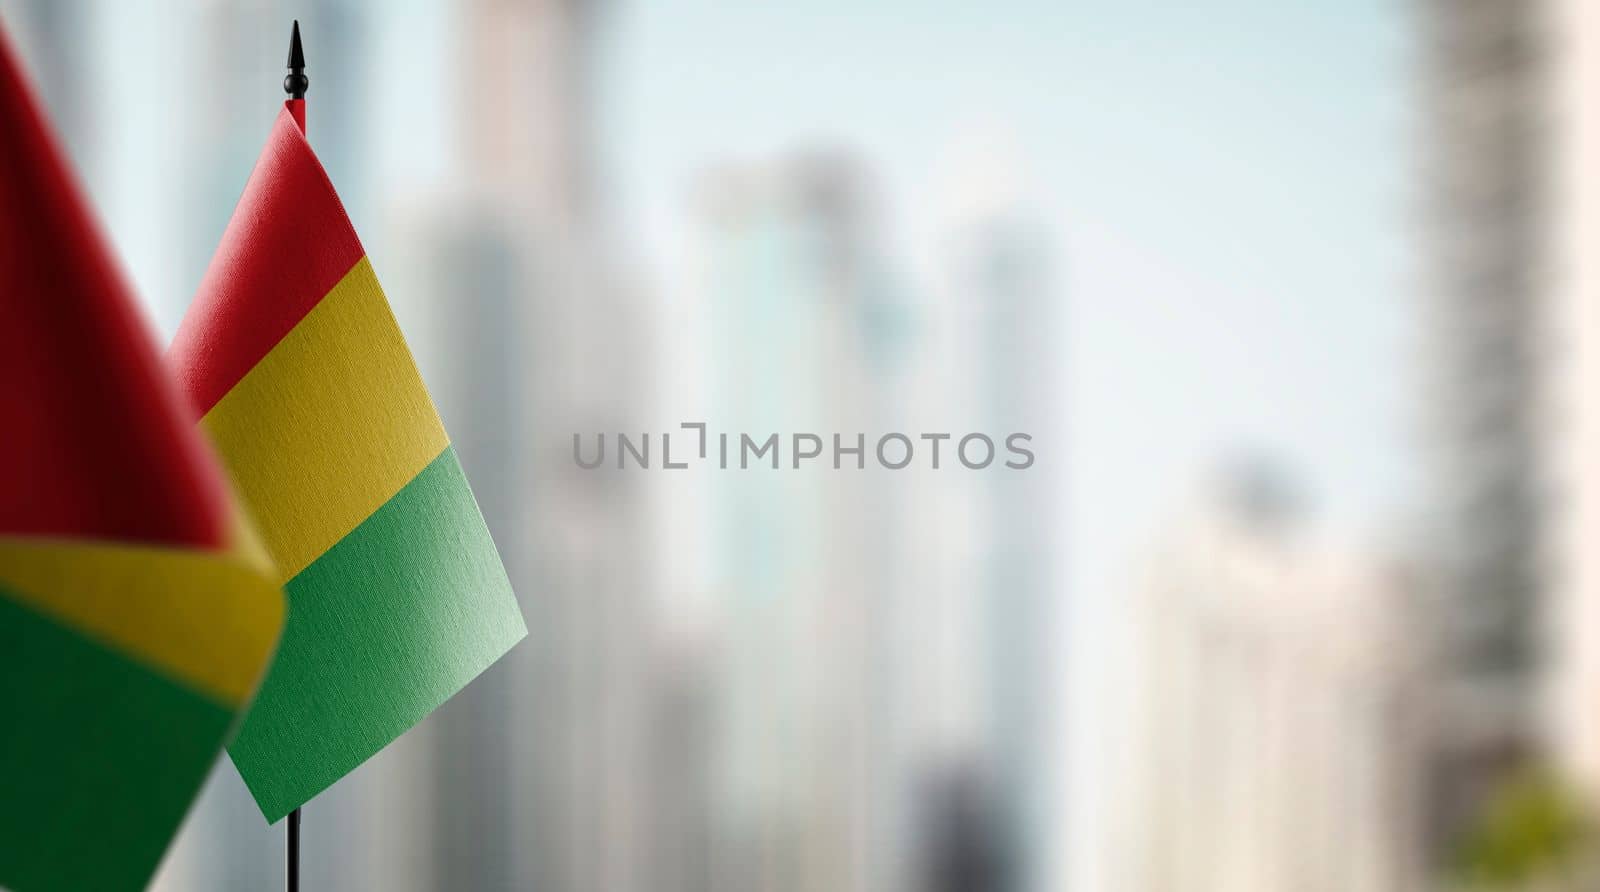 Small flags of the Guinea on an abstract blurry background by butenkow